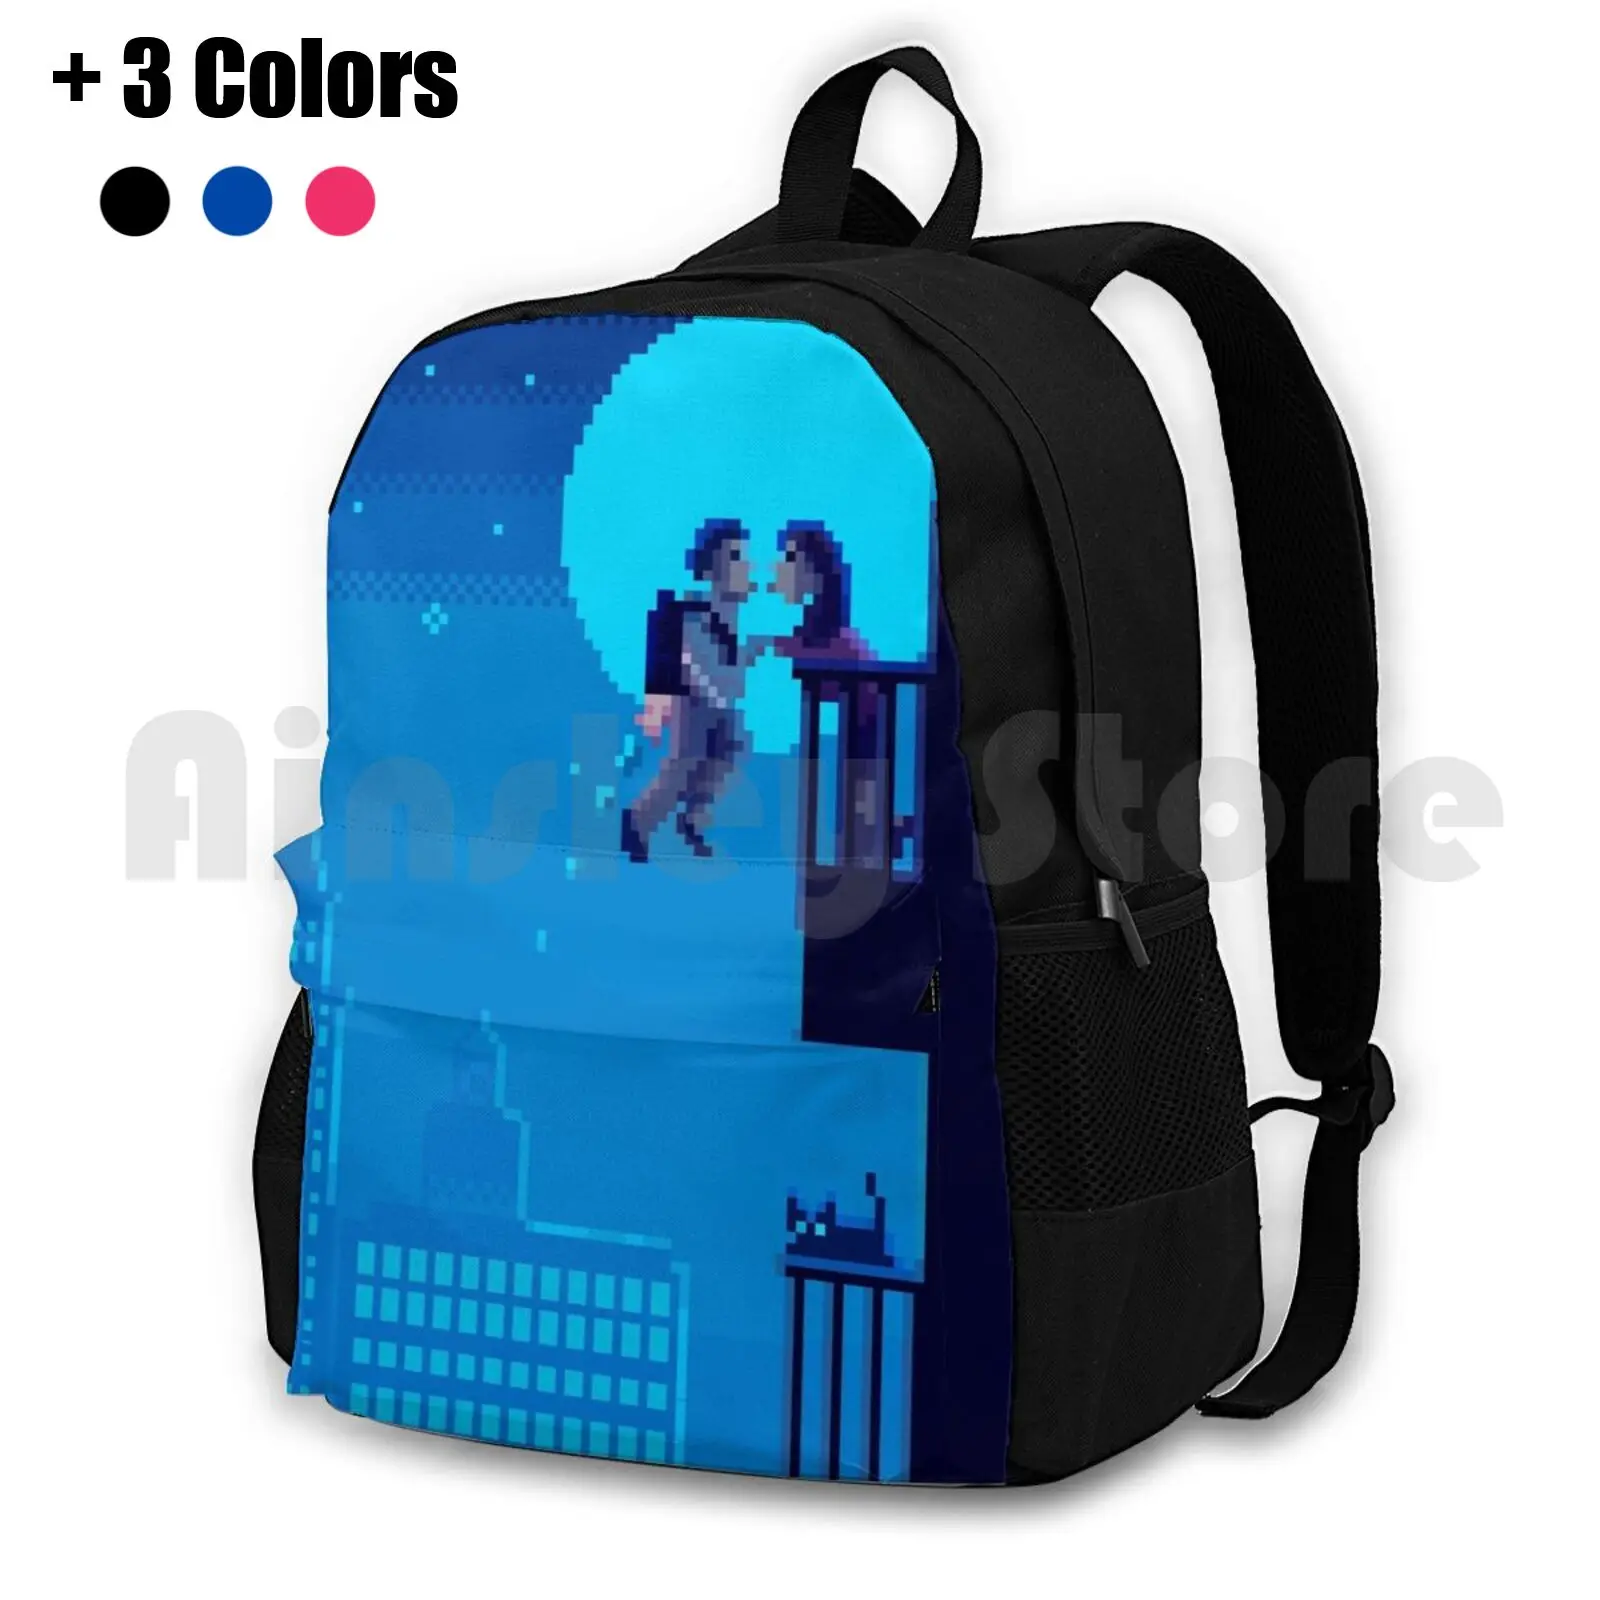 

Fly Me To The Moon Pixel Art Outdoor Hiking Backpack Riding Climbing Sports Bag Pixel Pixel Art Retro Videogames 8Bit Games